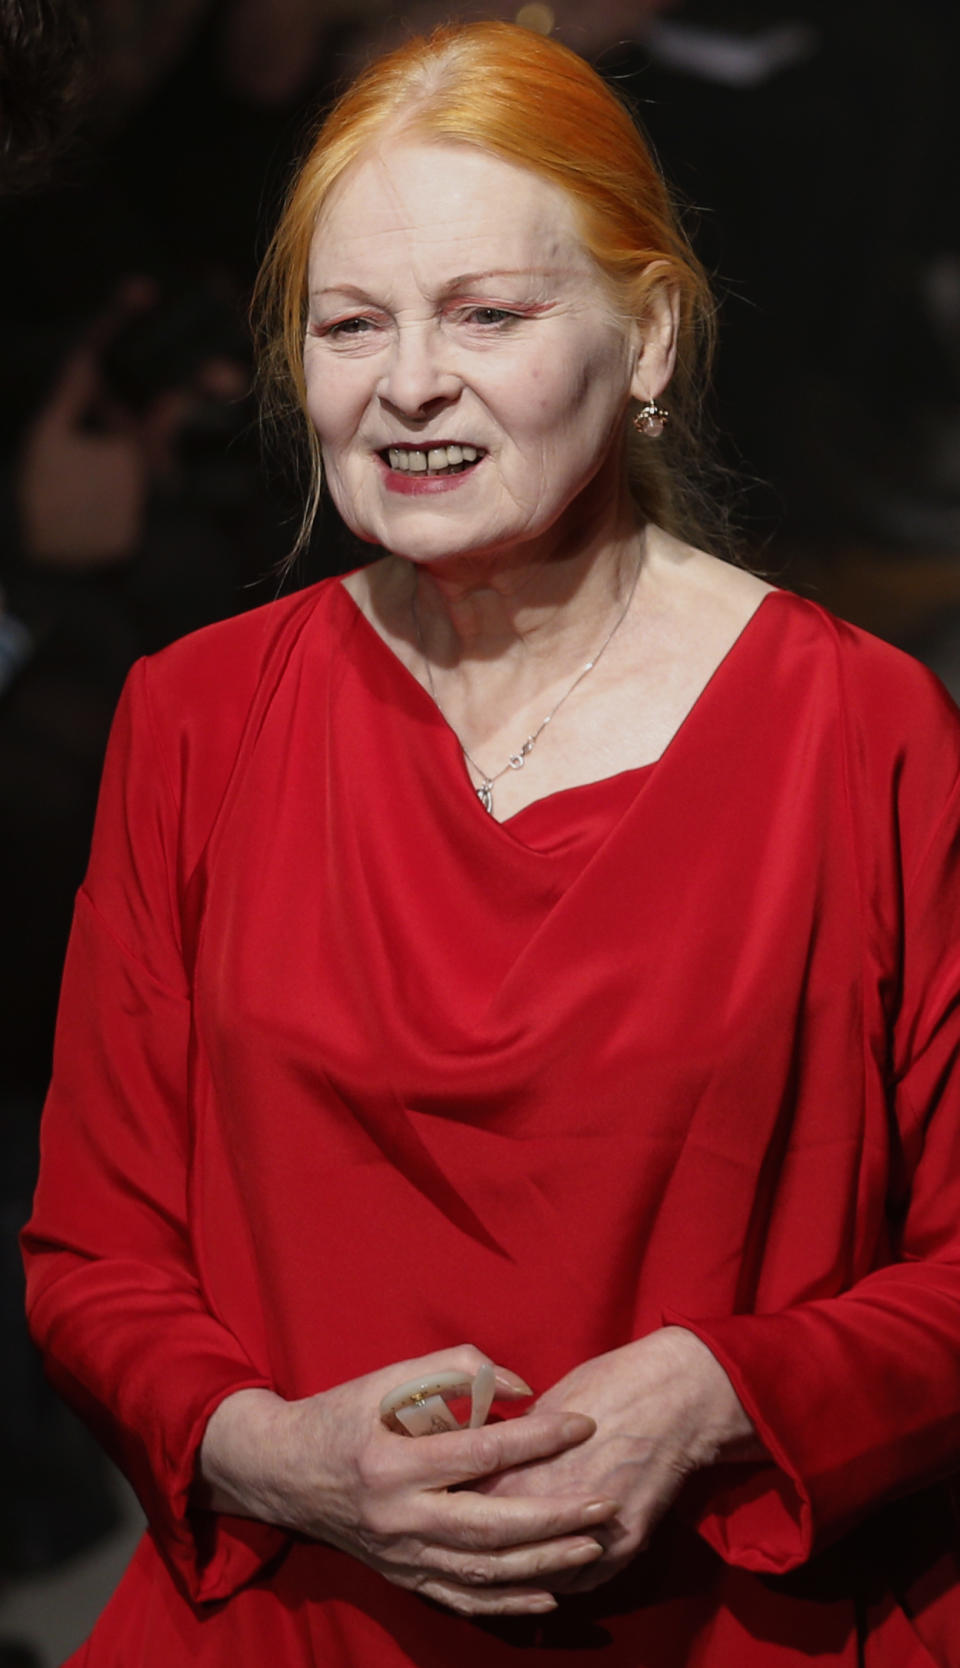 Designer Vivienne Westwood accepts applause after her Fall/Winter 2013-2014 ready to wear collection, presented in Paris, Saturday, March 2, 2013. (AP Photo/Christophe Ena)